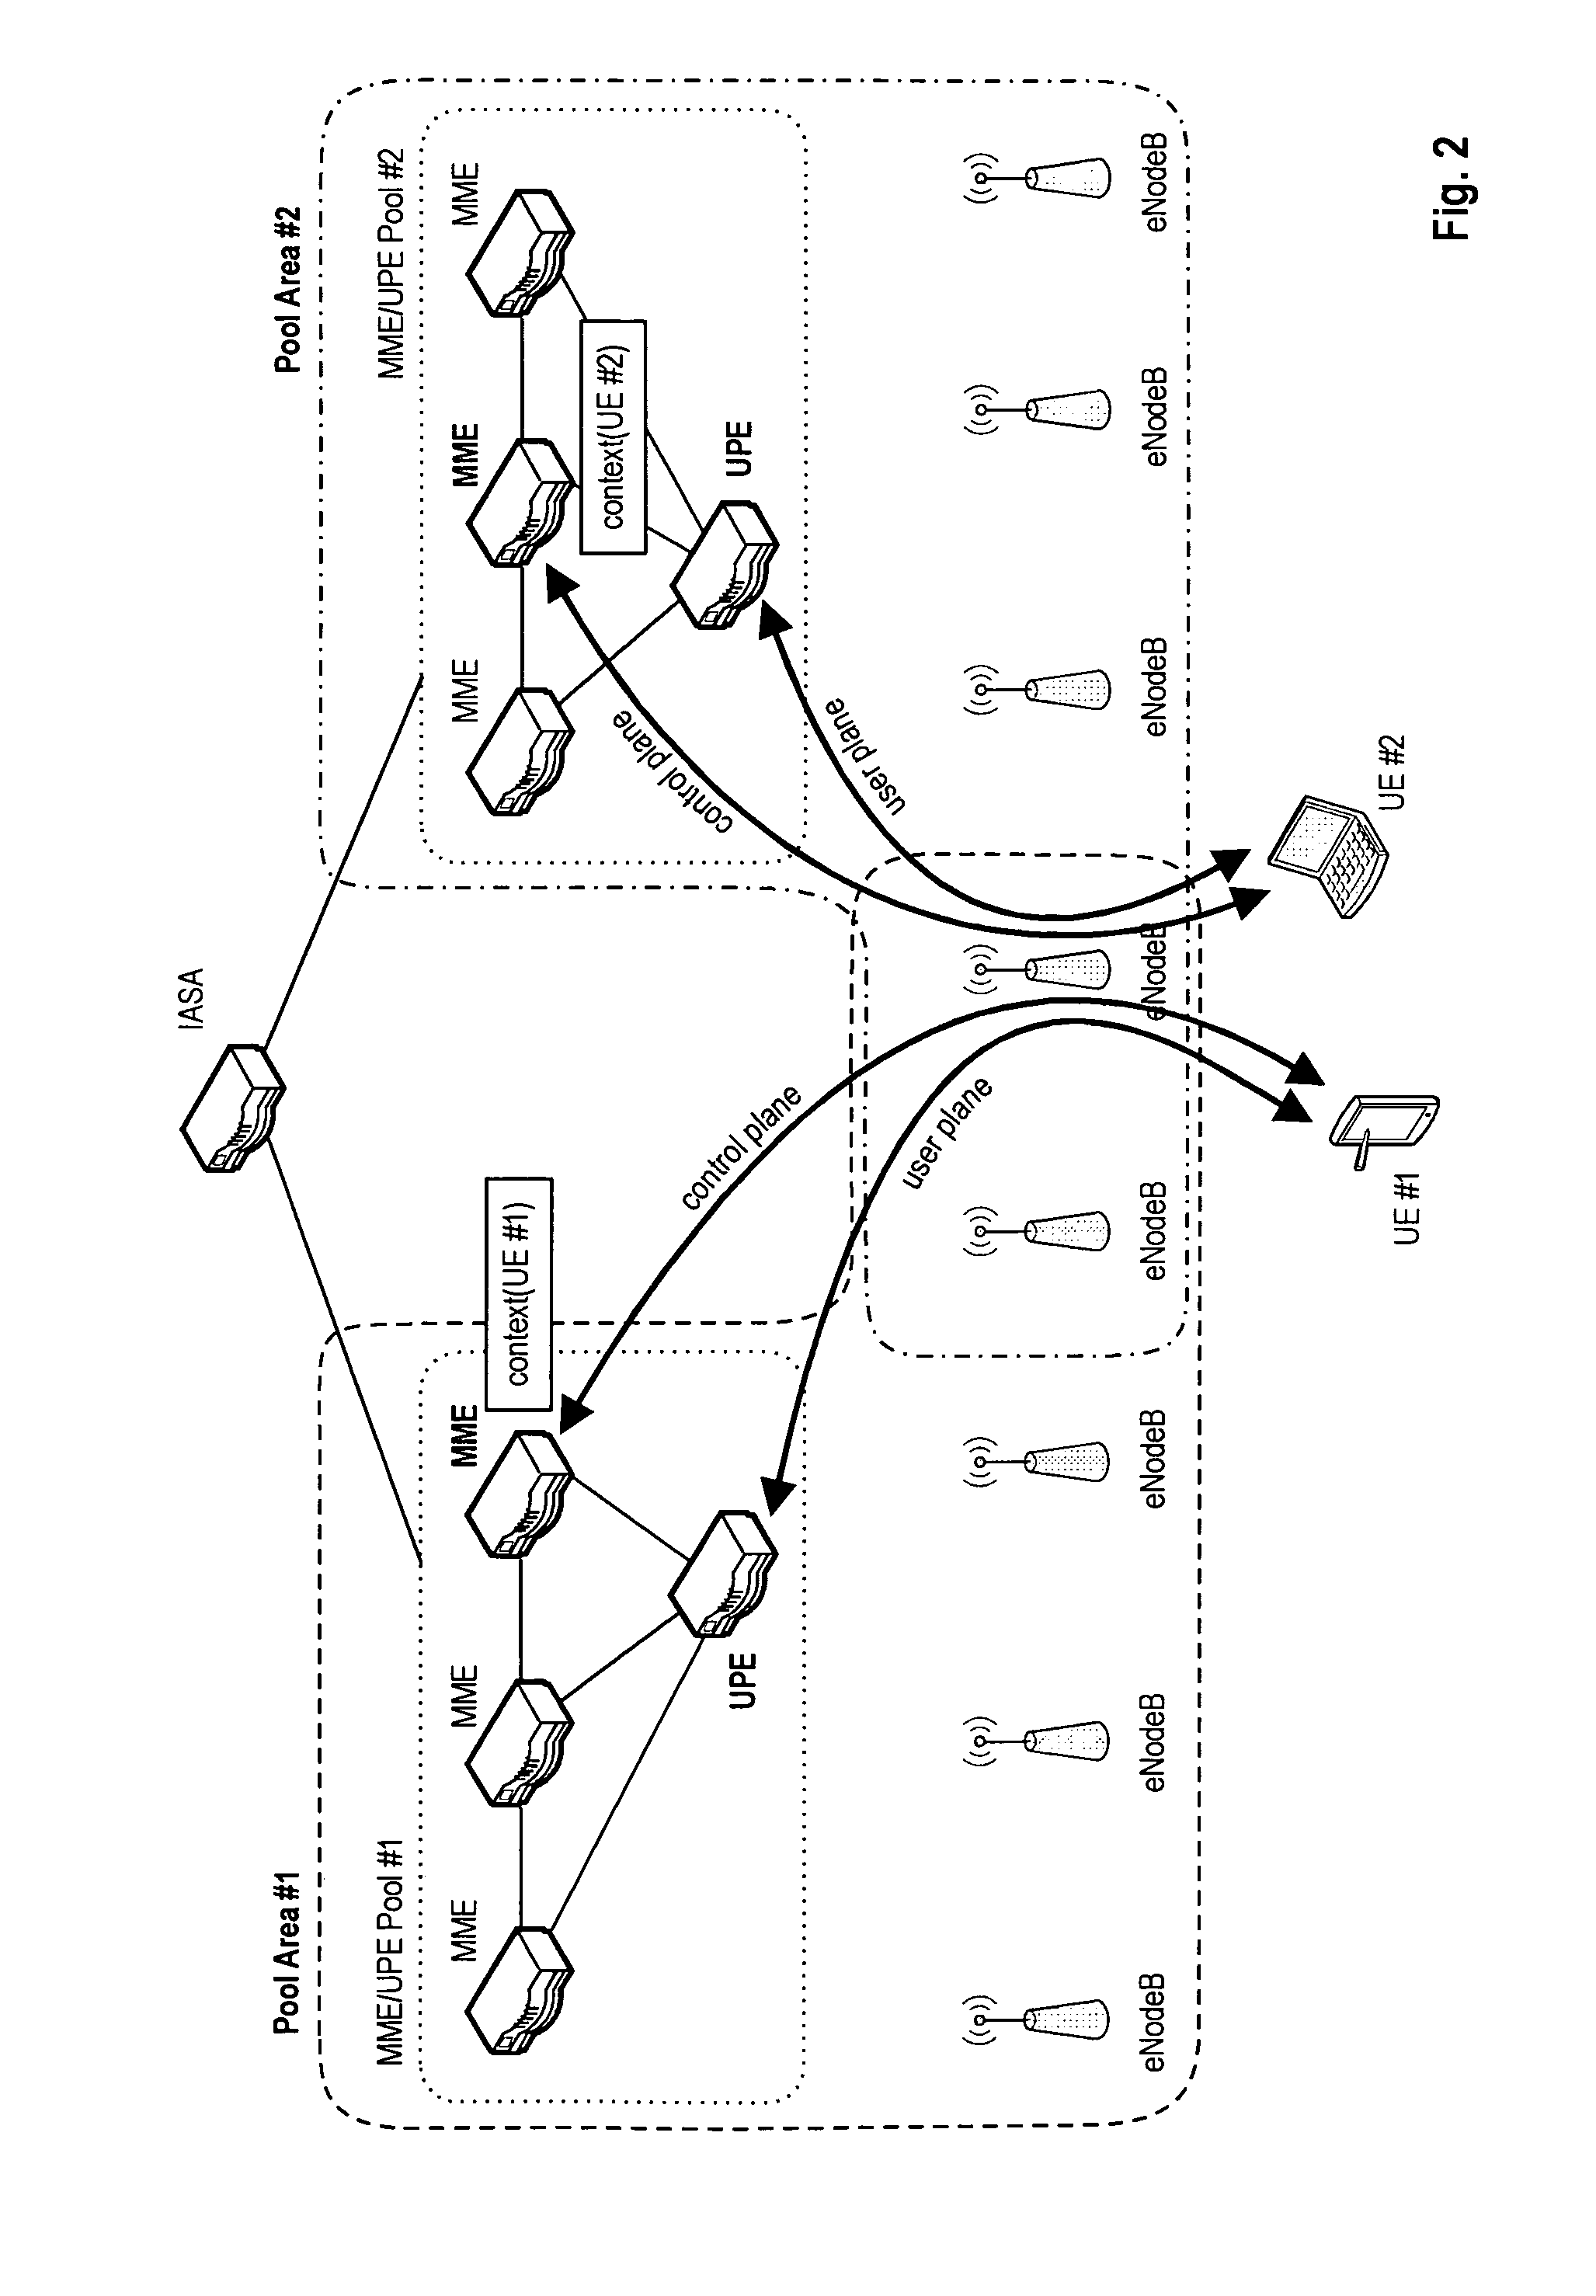 Multicast service provision in a mobile communication system having overlapping pool areas